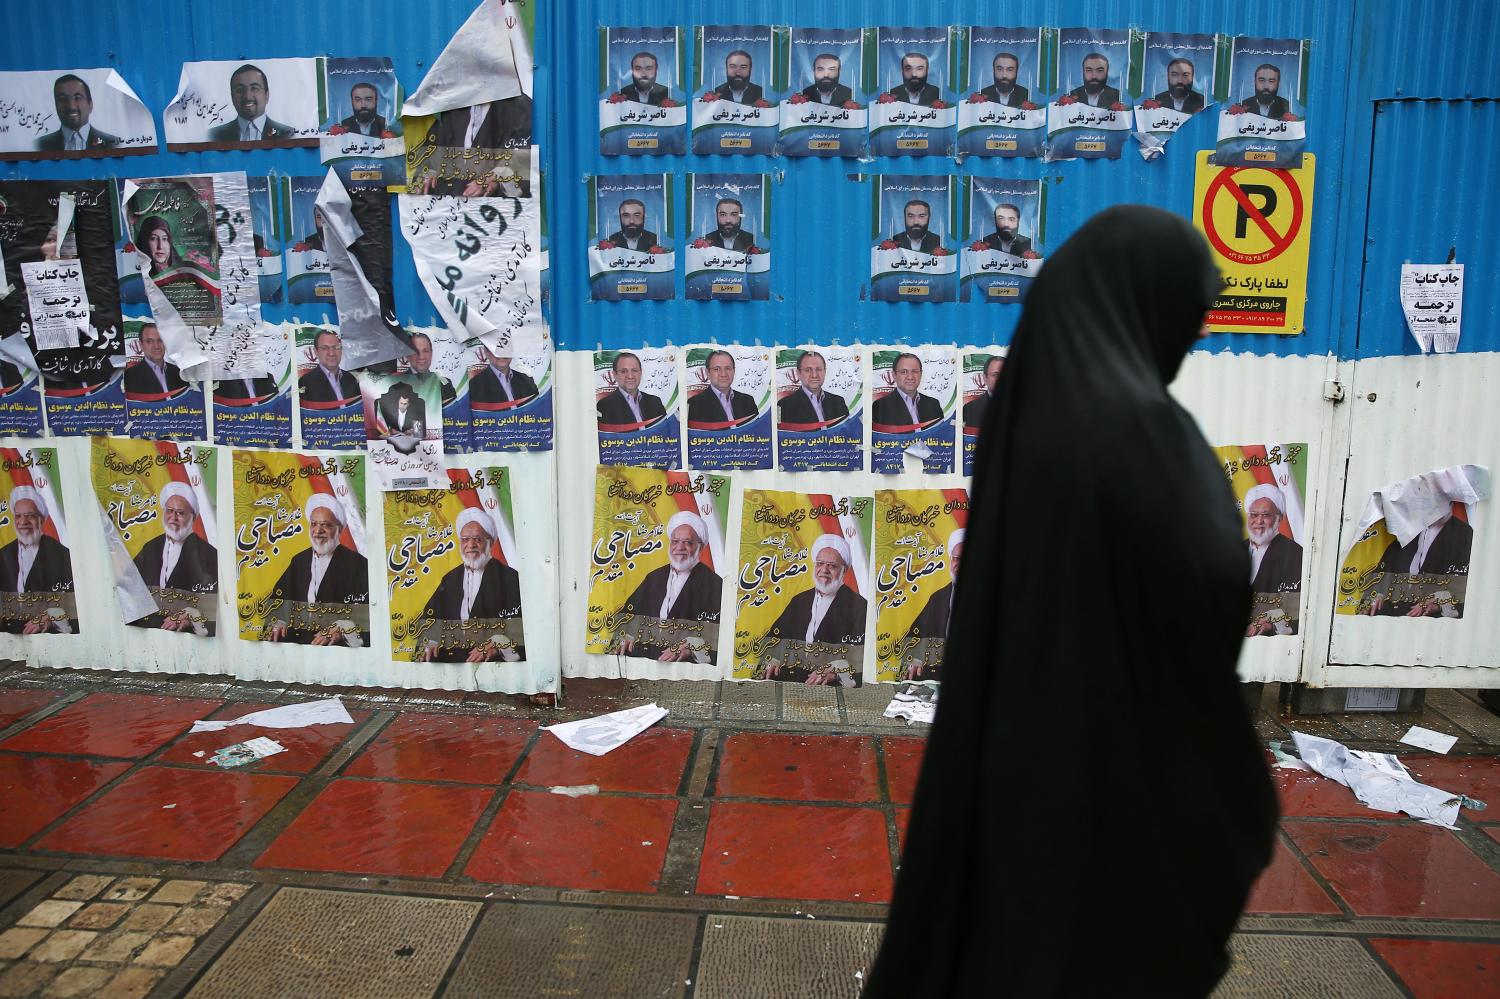 A woman walks past parliamentary election campaign posters at the end of the parliamentary election day in Tehran, Iran February 20, 2020. WANA (West Asia News Agency)/Nazanin Tabatabaee via REUTERS ATTENTION EDITORS - THIS IMAGE HAS BEEN SUPPLIED BY A THIRD PARTY.